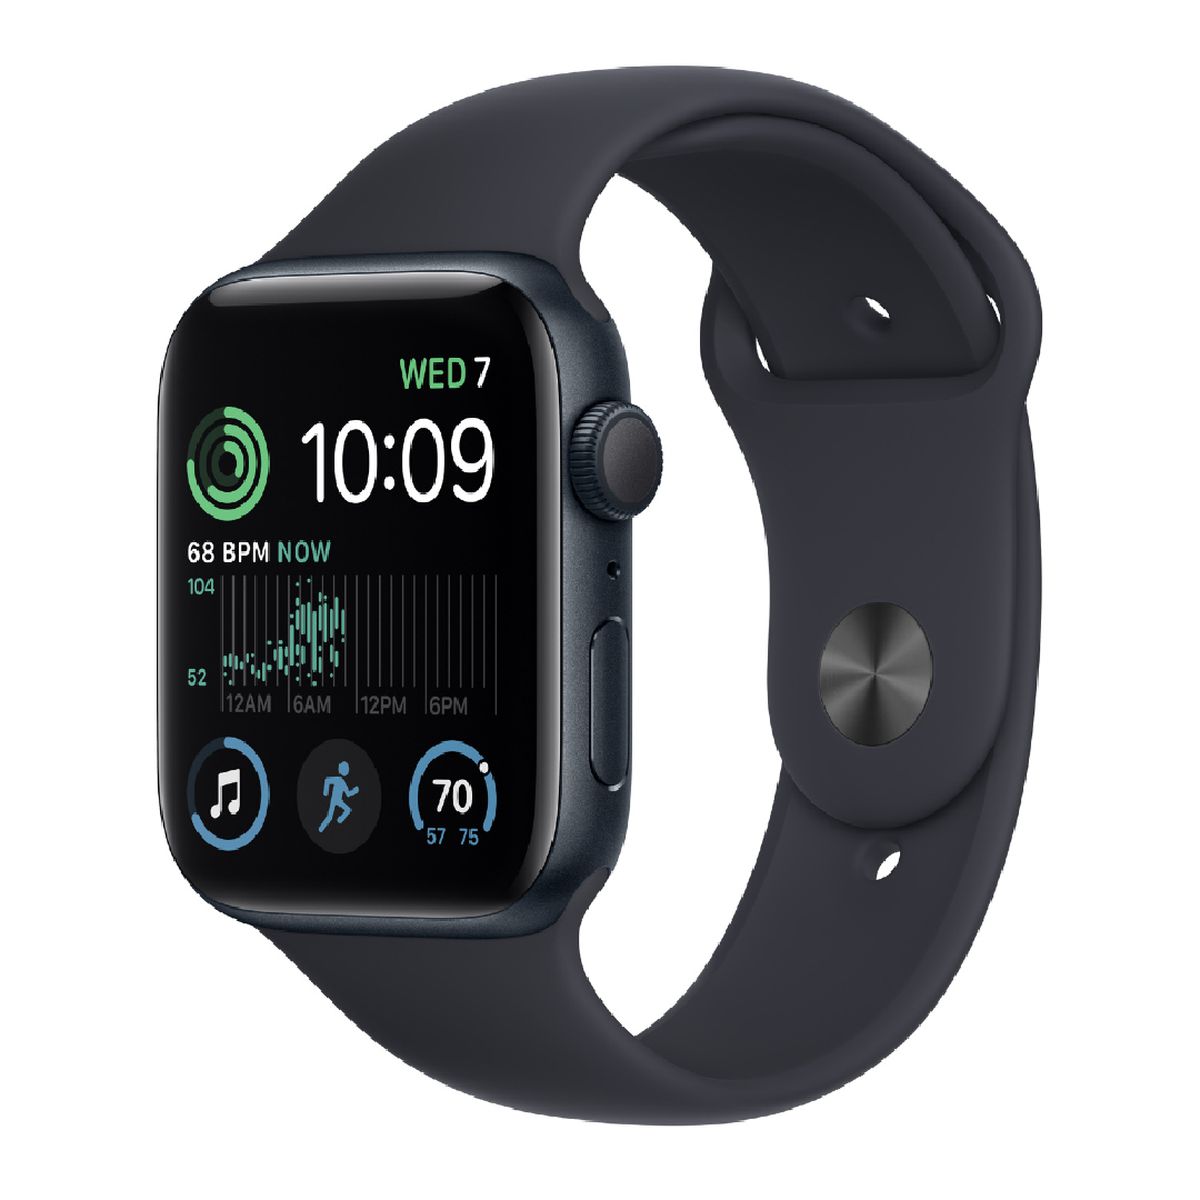 Second gen Apple Watch SE 2022 Press Image Apple Watch Series 8, Ultra, and SE: price, release date, and preorder